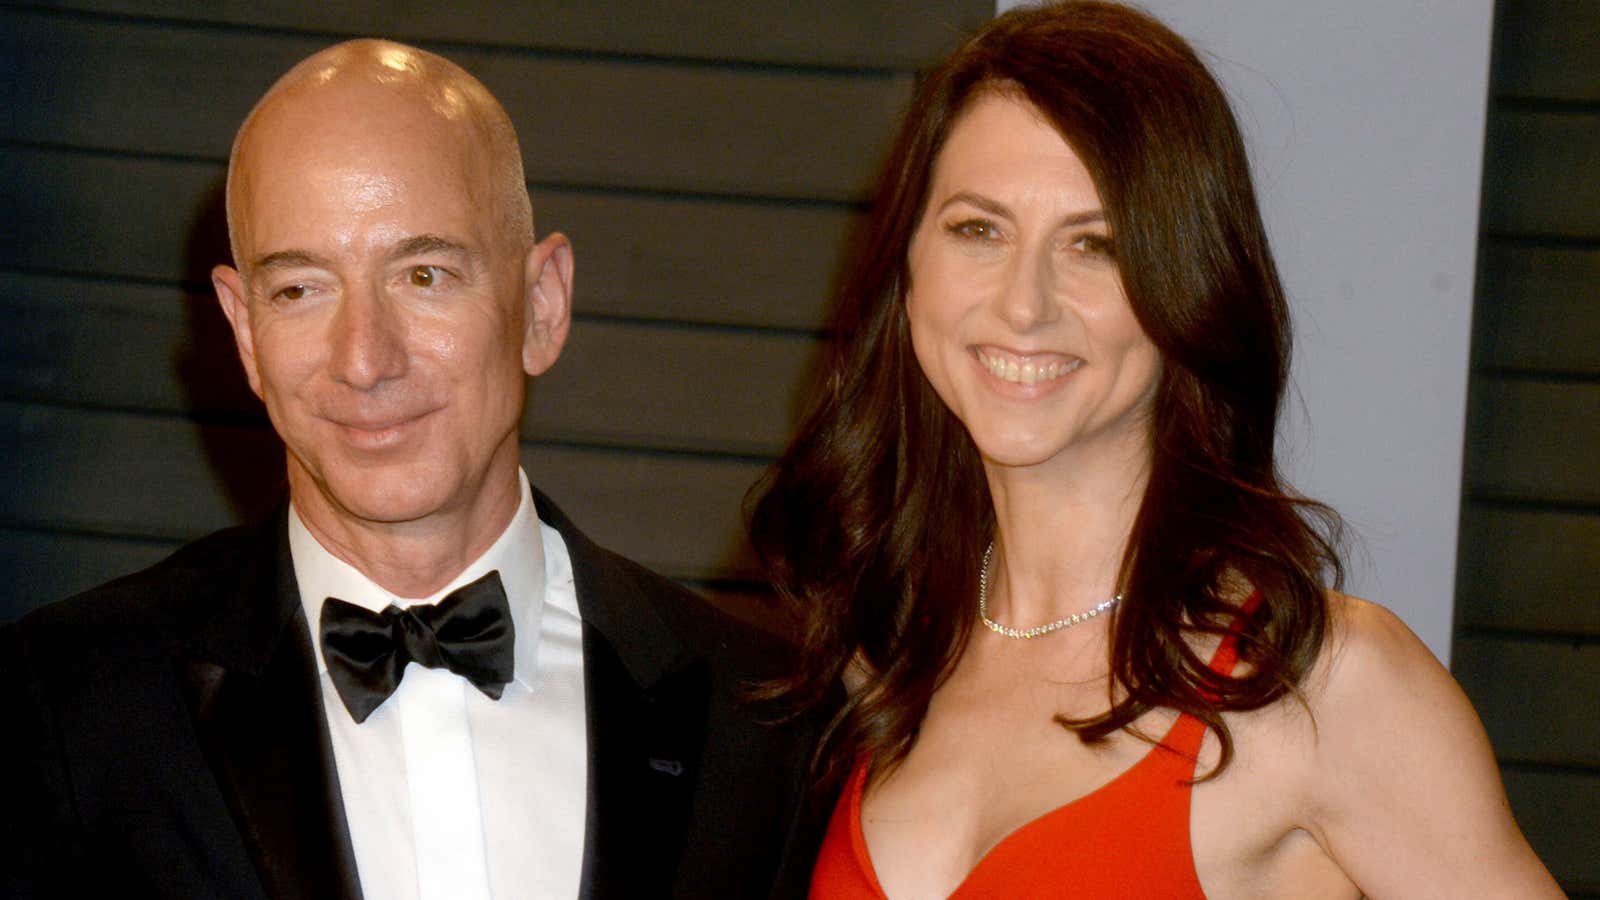 The Jeff Bezos / National Enquirer American Media Publishing scandal involving alleged blackmail, extortion, racy texts and compromising photographs continues to escalate.